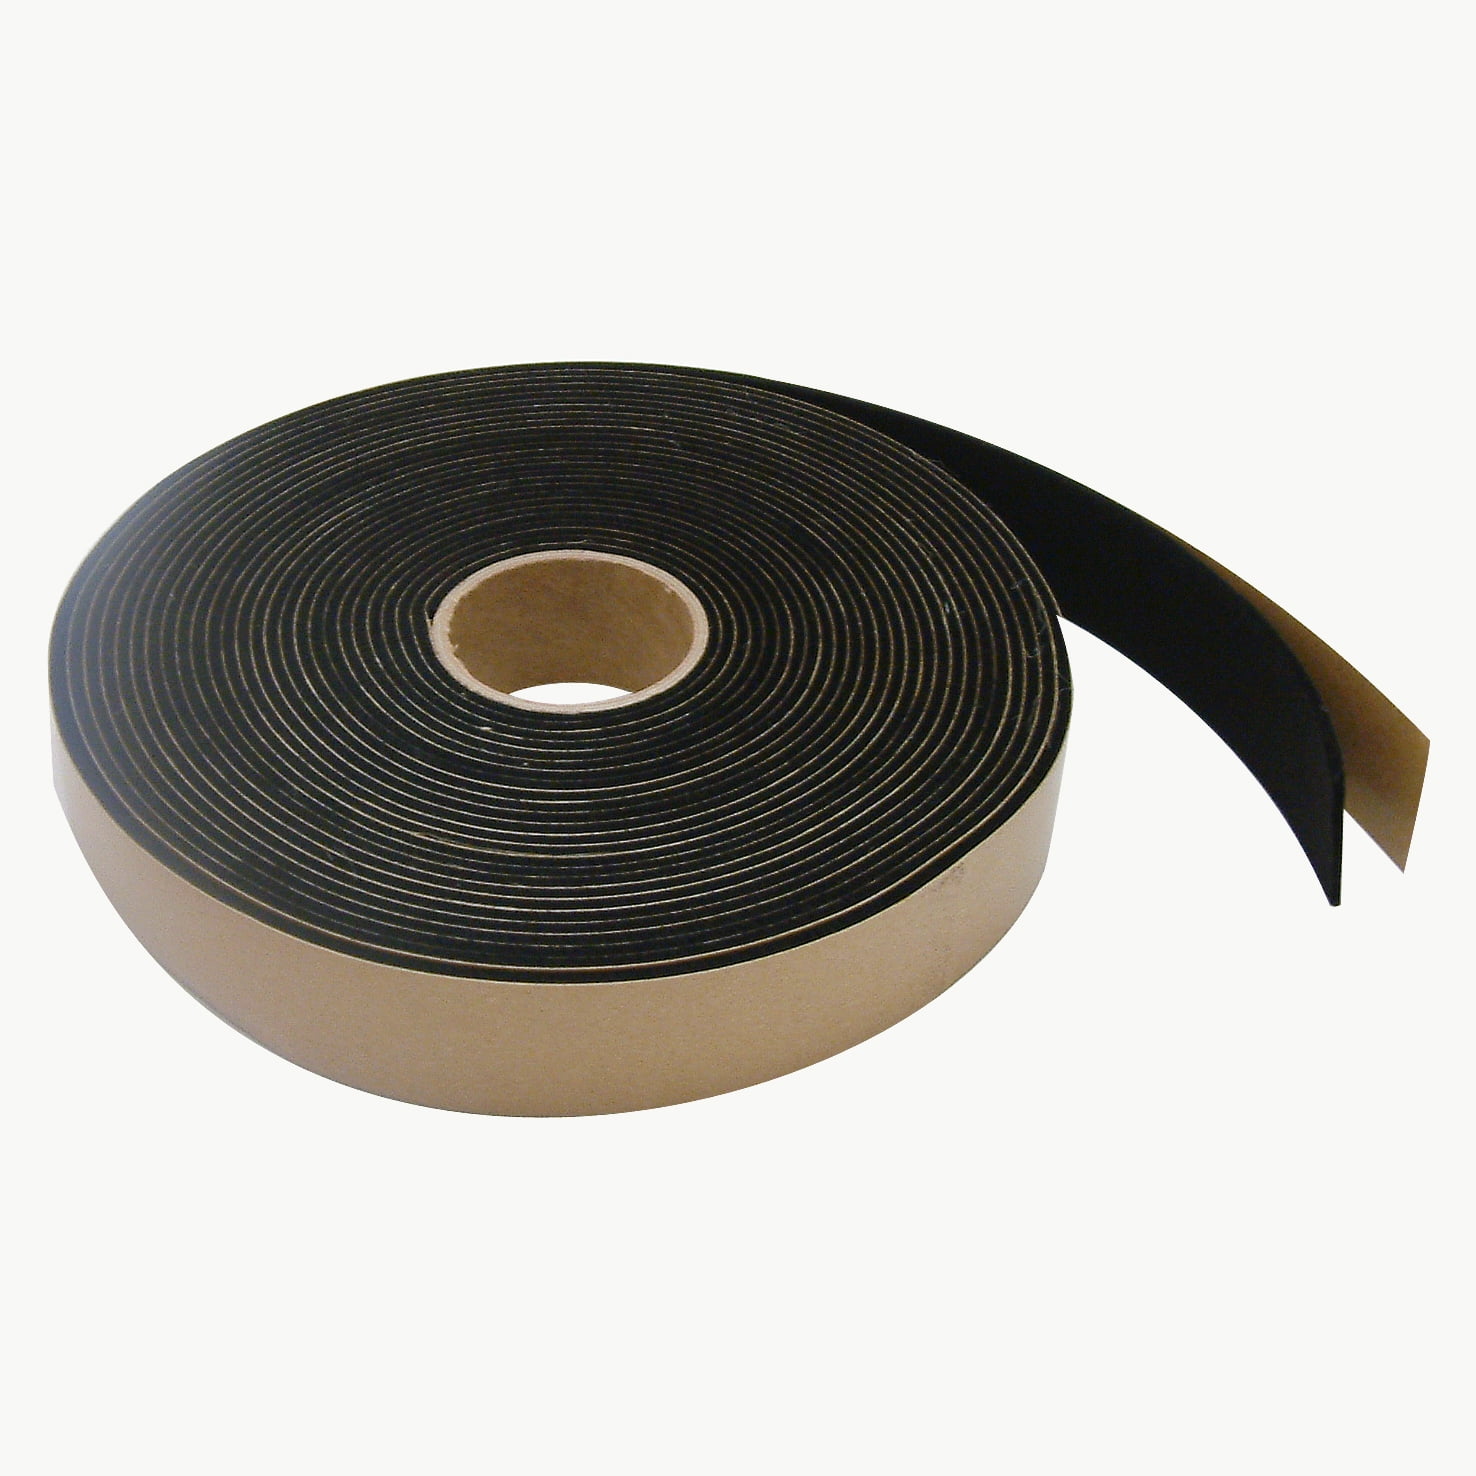 2in x 60ft Roll Black Felt Tape (Remnant/Clearance)